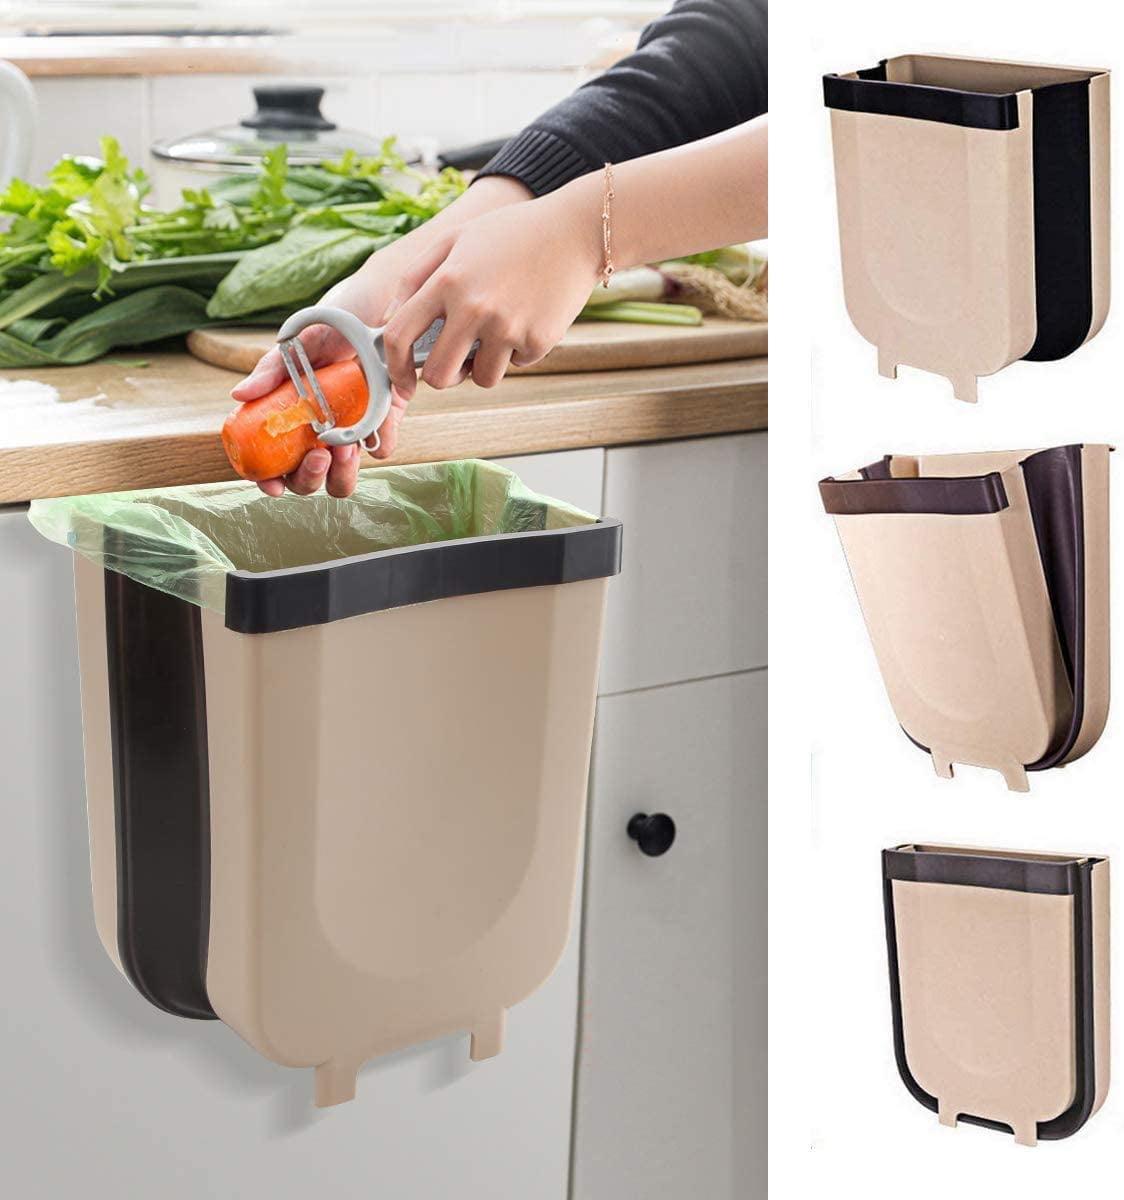 Collapsible Trash Bin Small Compact Garbage Can Attached to Cabinet Door Kitchen Drawer Bedroom Dorm Room Car Jebblas Hanging Trash Can Folded for Kitchen Cabinet Door 